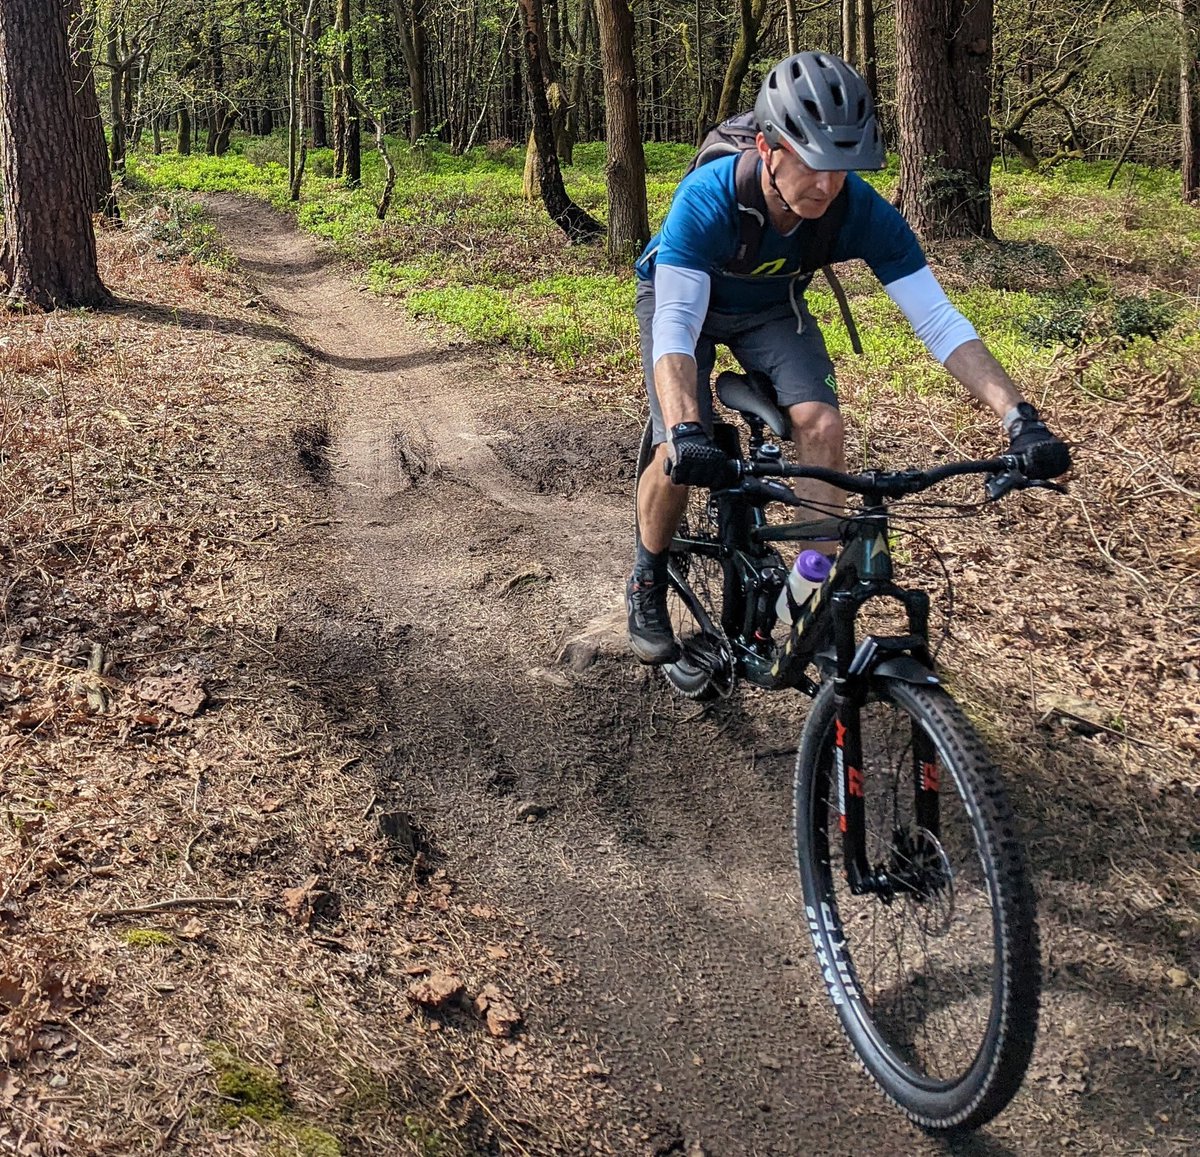 Choose between group coaching or a one-to-one session to tune your off-road skills. James chose a solo session with our Andy, and made solid progress on corners, berms and trail features. marmalademtb.com/mountain-bike-…